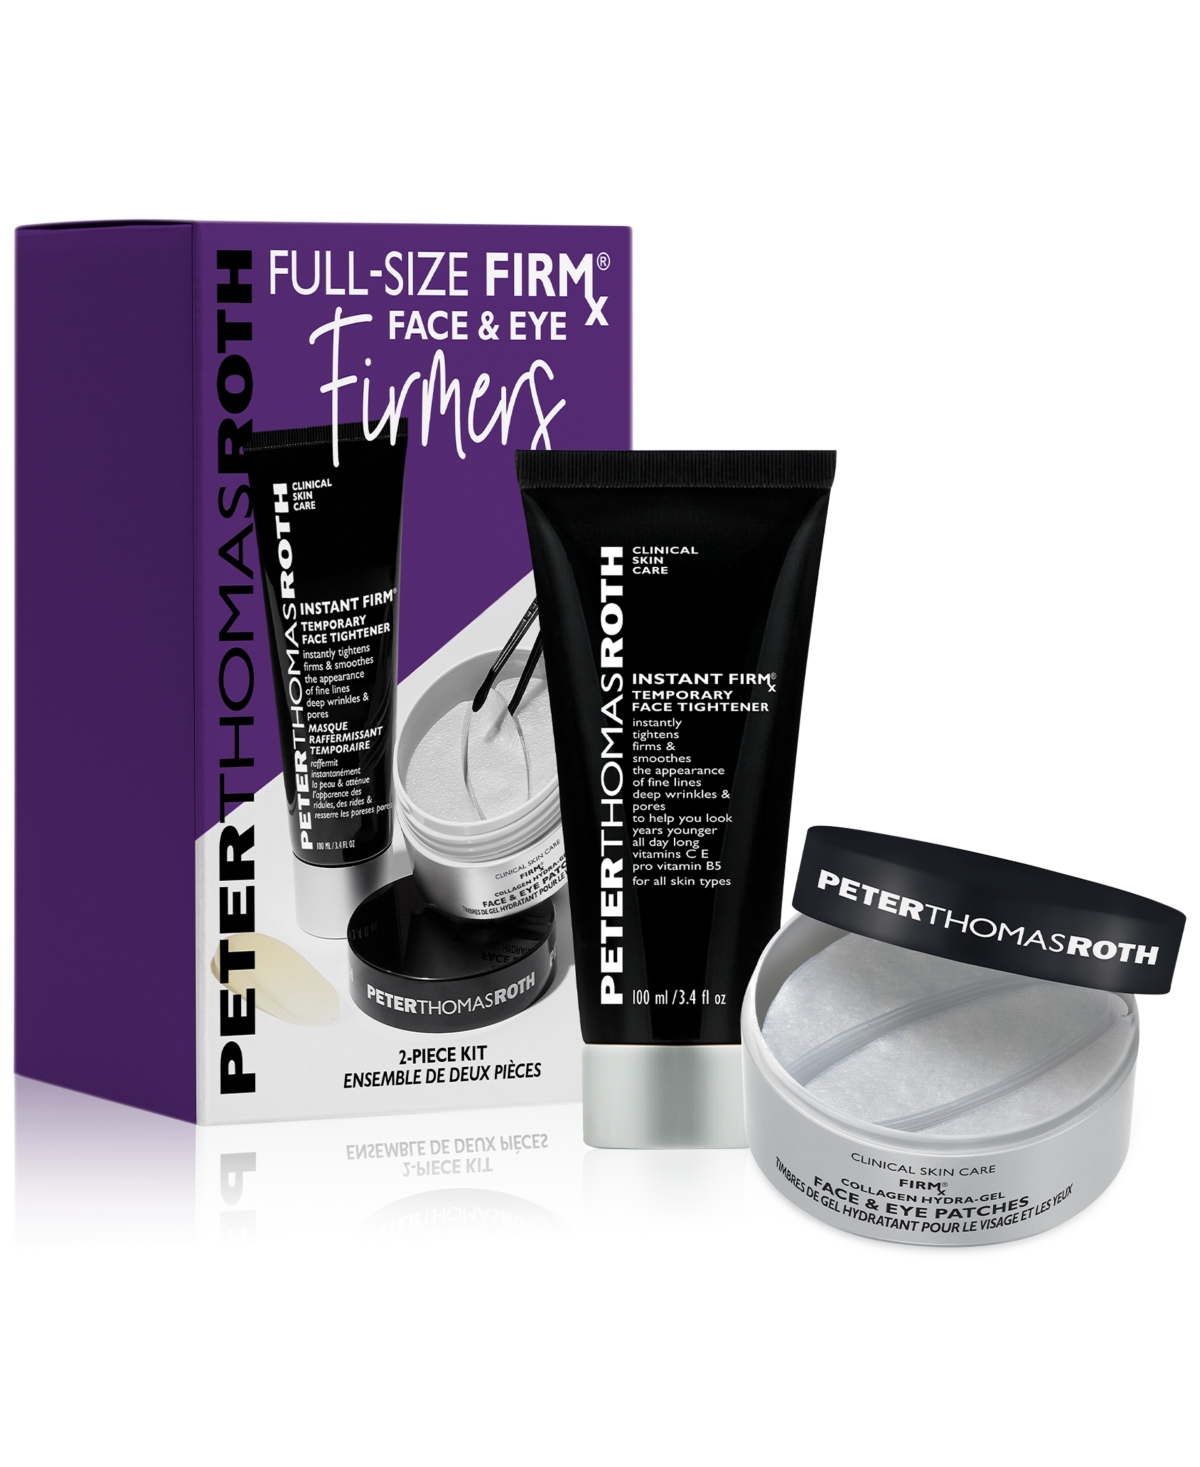 Peter Thomas Roth 2-pc. Full-size Firmx Face & Eye Firmers Set